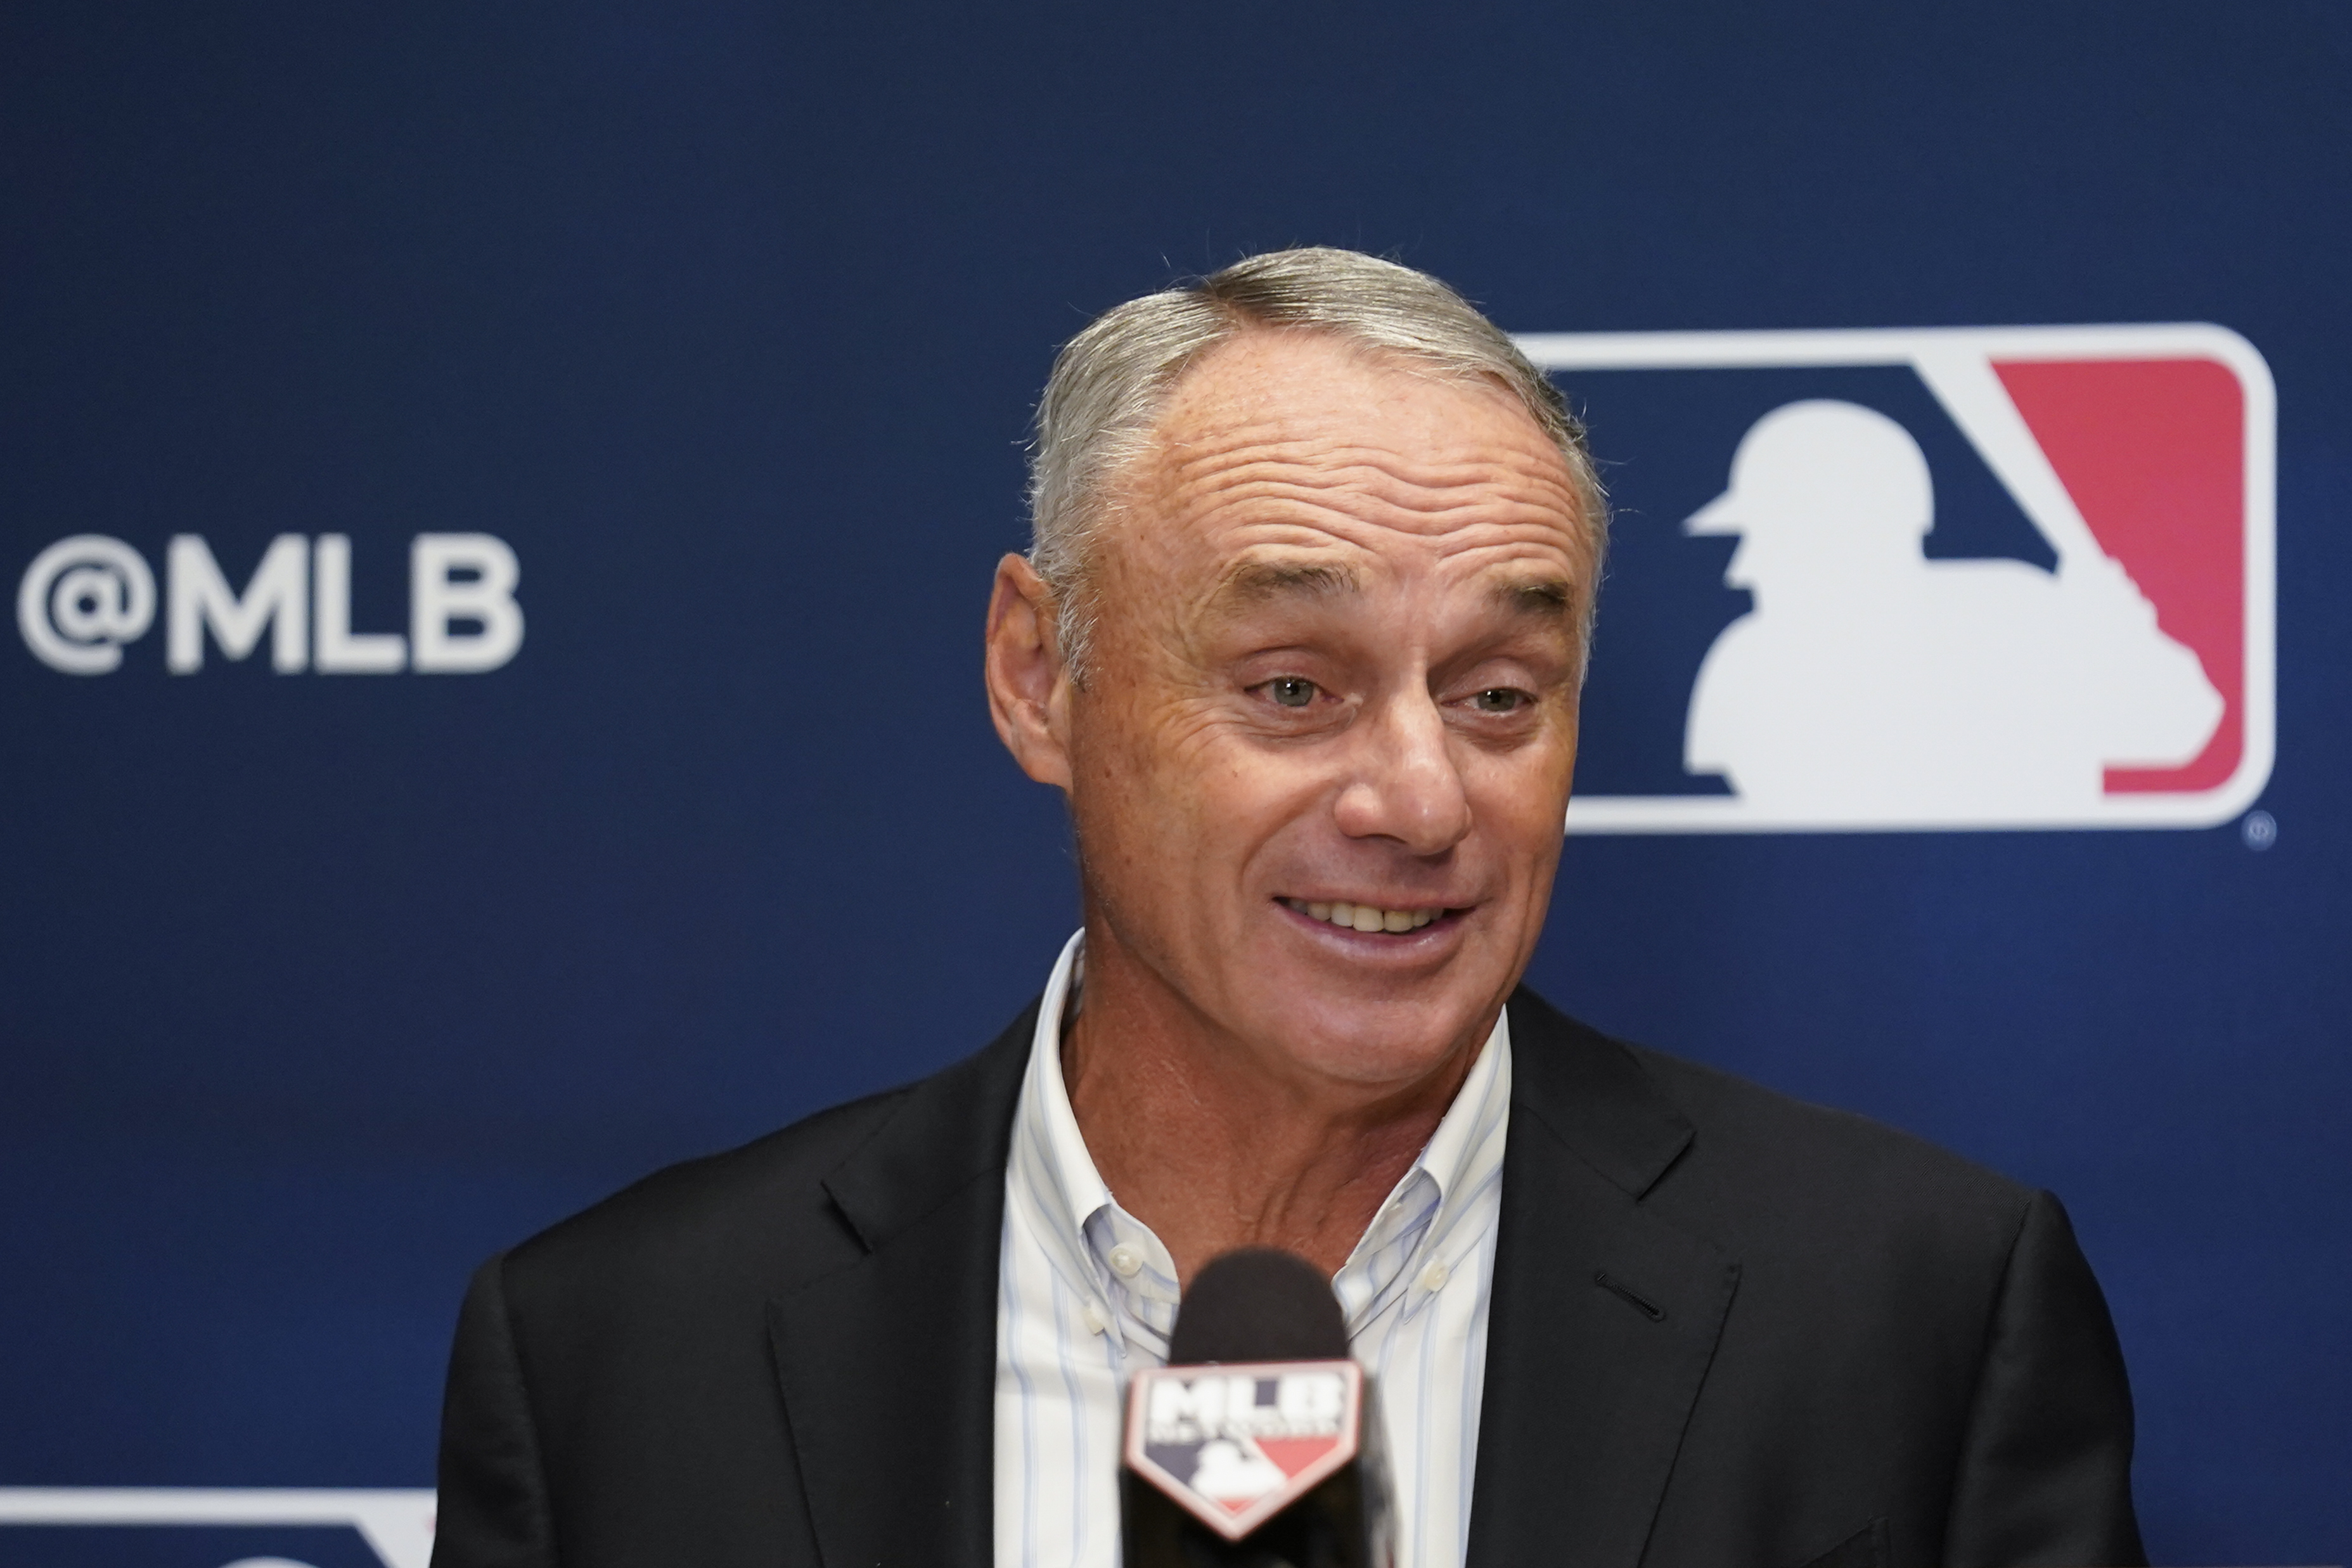 Major League Baseball Commissioner Rob Manfred speaks to reporters following an owners' meeting.